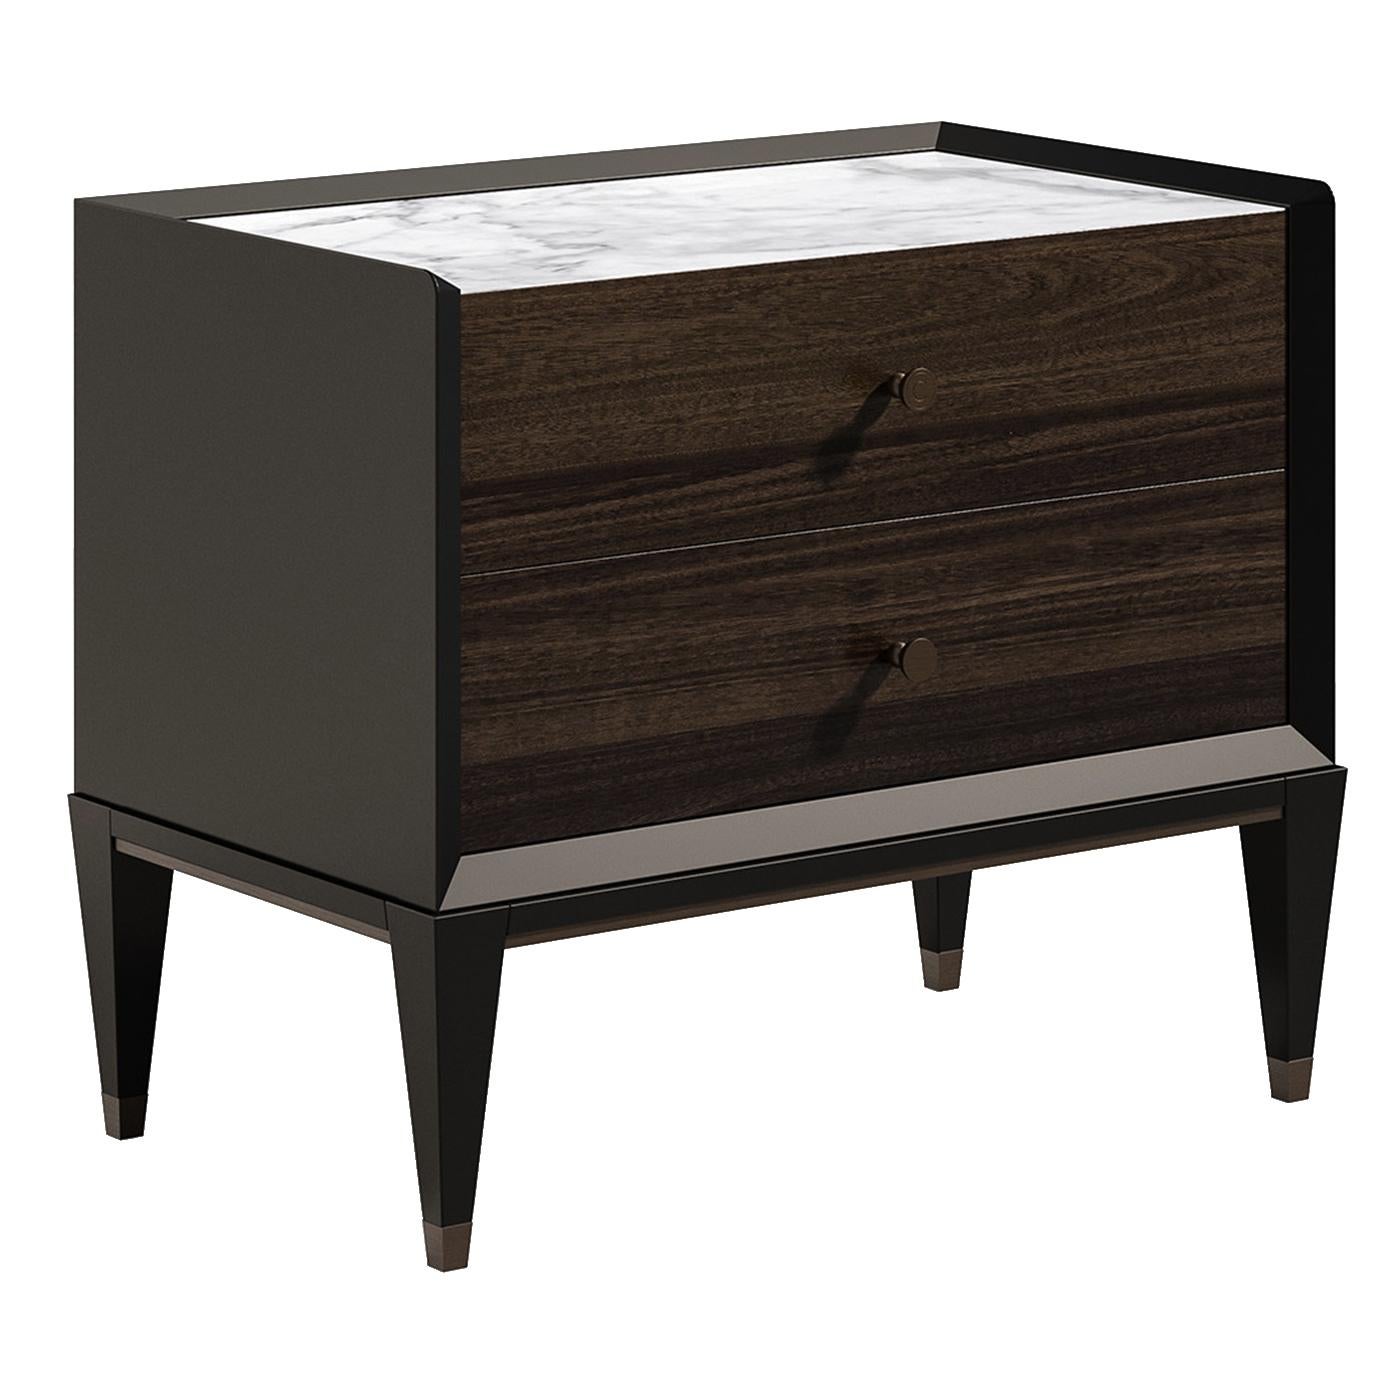 Part of the Eclipse collection, the austere frame of this modern nightstand is finished in black with a velvet-like effect. The encased, two-drawer unit features brown veneered front panels with round metal handles and a striking white marble top.